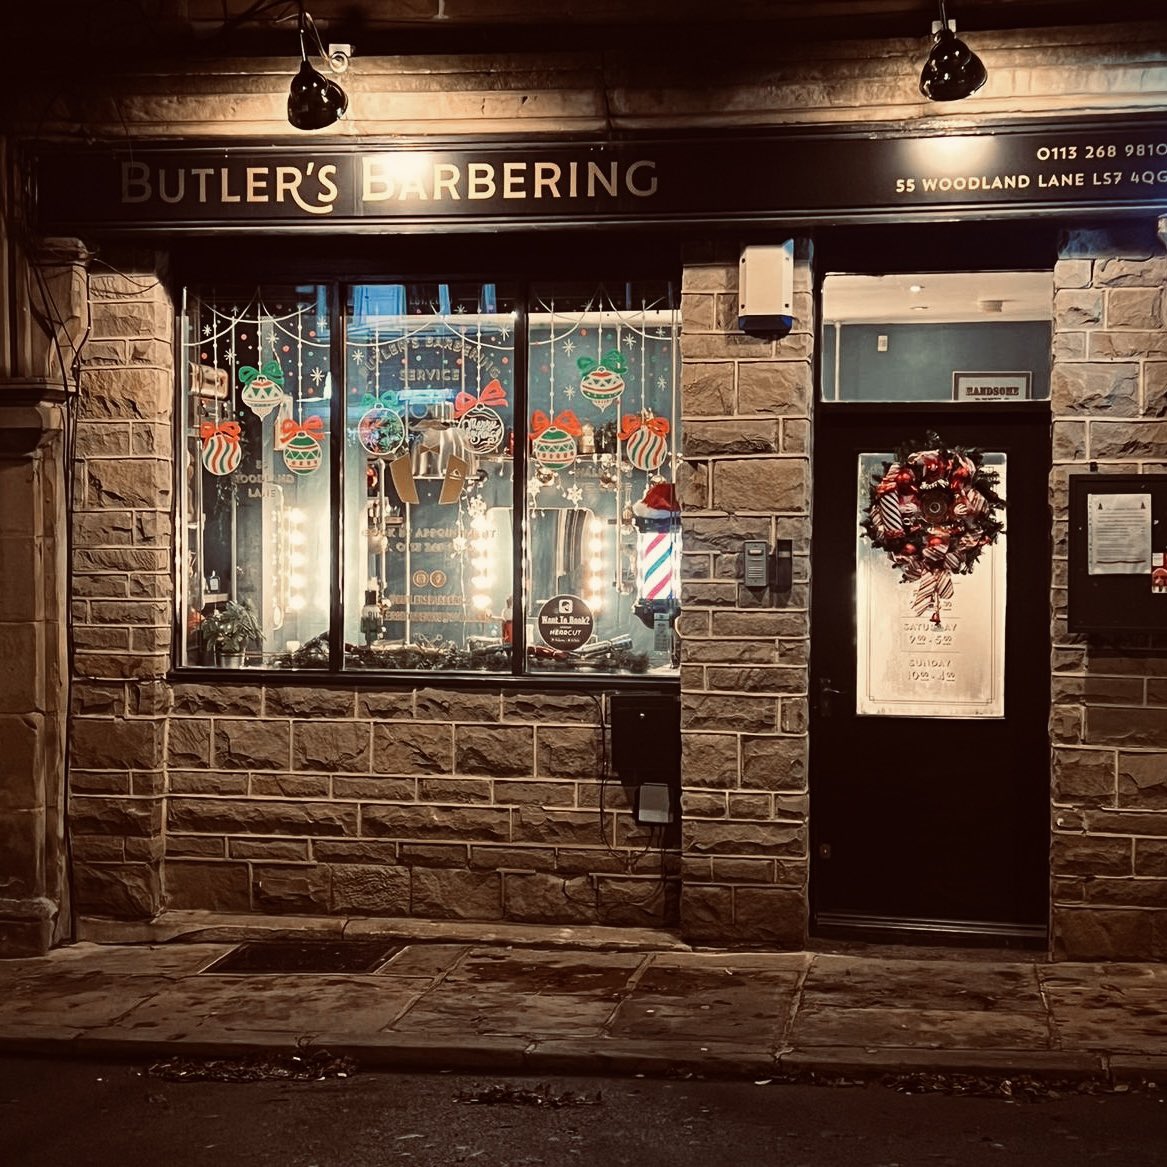 The last day of our 12 Days of Christmas Living Advent Calendar and last but not least some lovely festive cheer from the team at Butler’s Barbers #chapelallerton #community #christmas